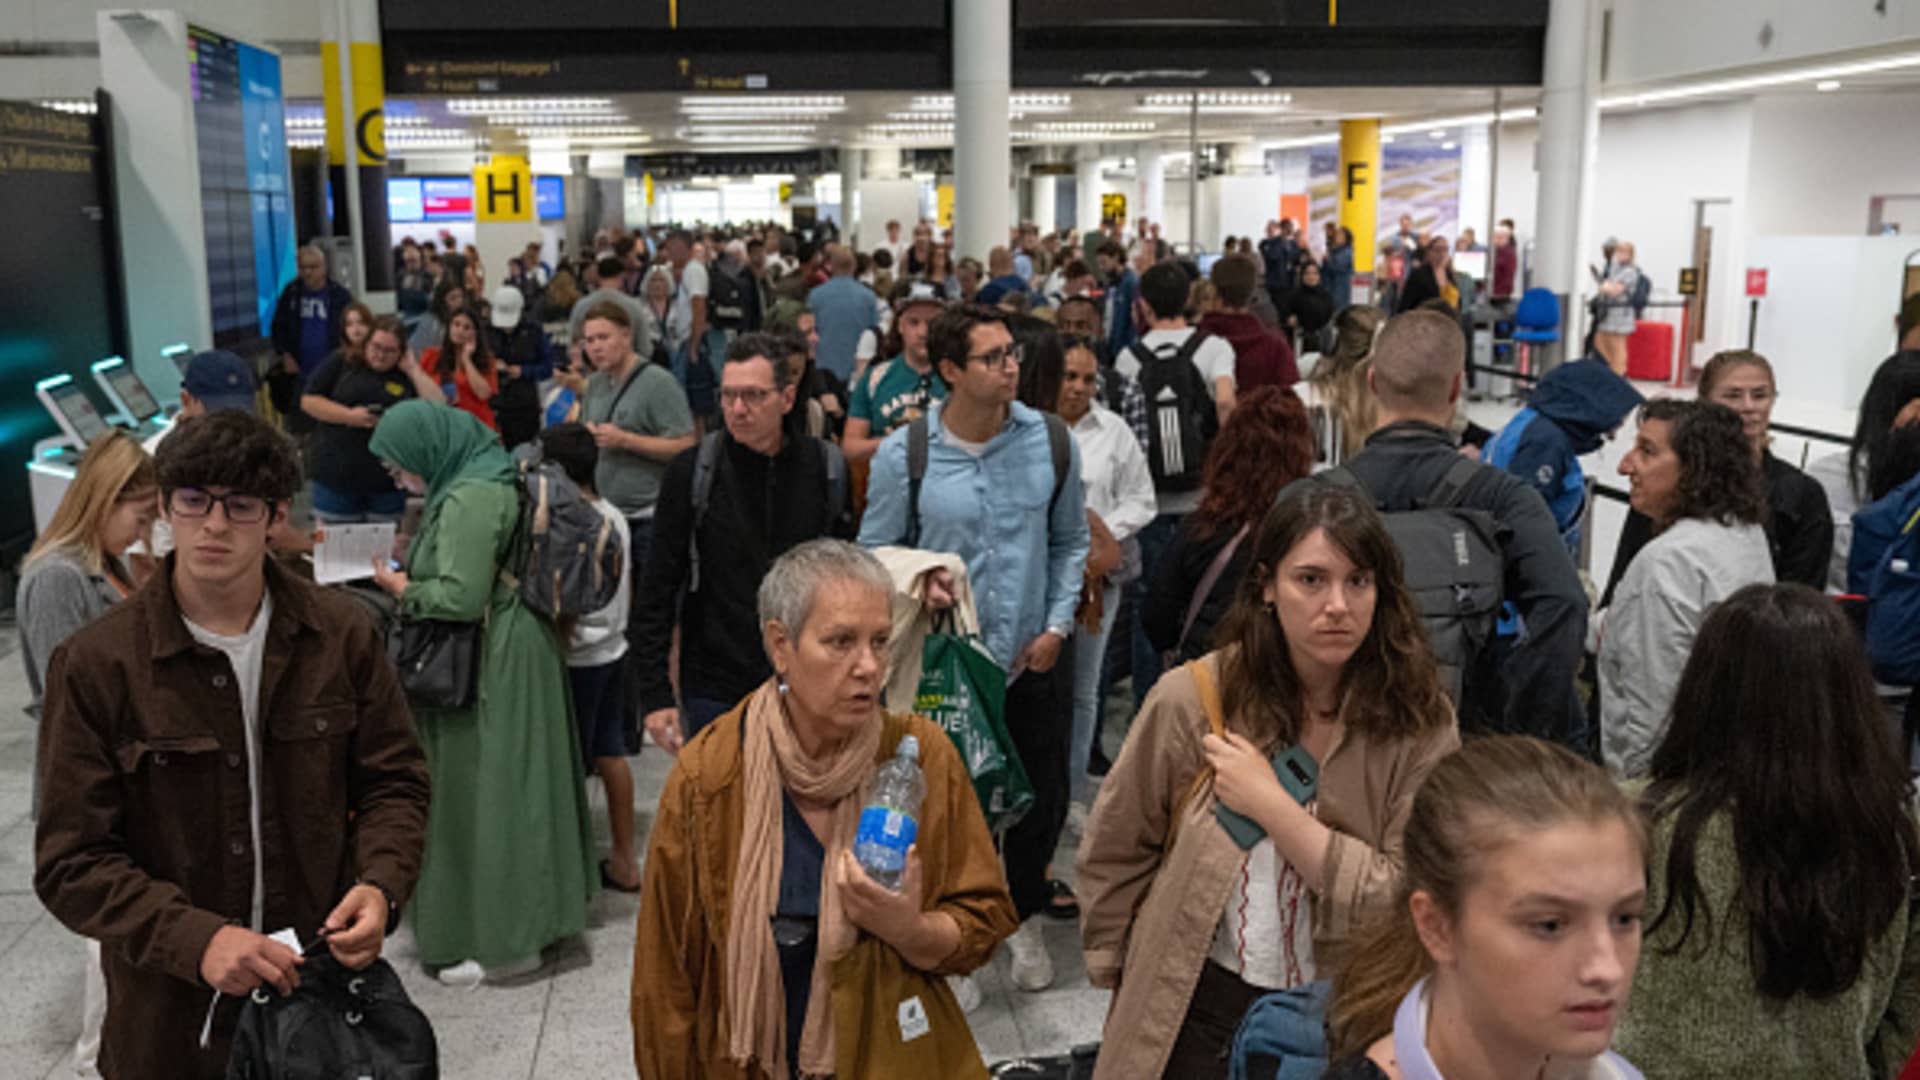 UK flight disruption will take 'days' to fix after technical glitch causes travel chaos